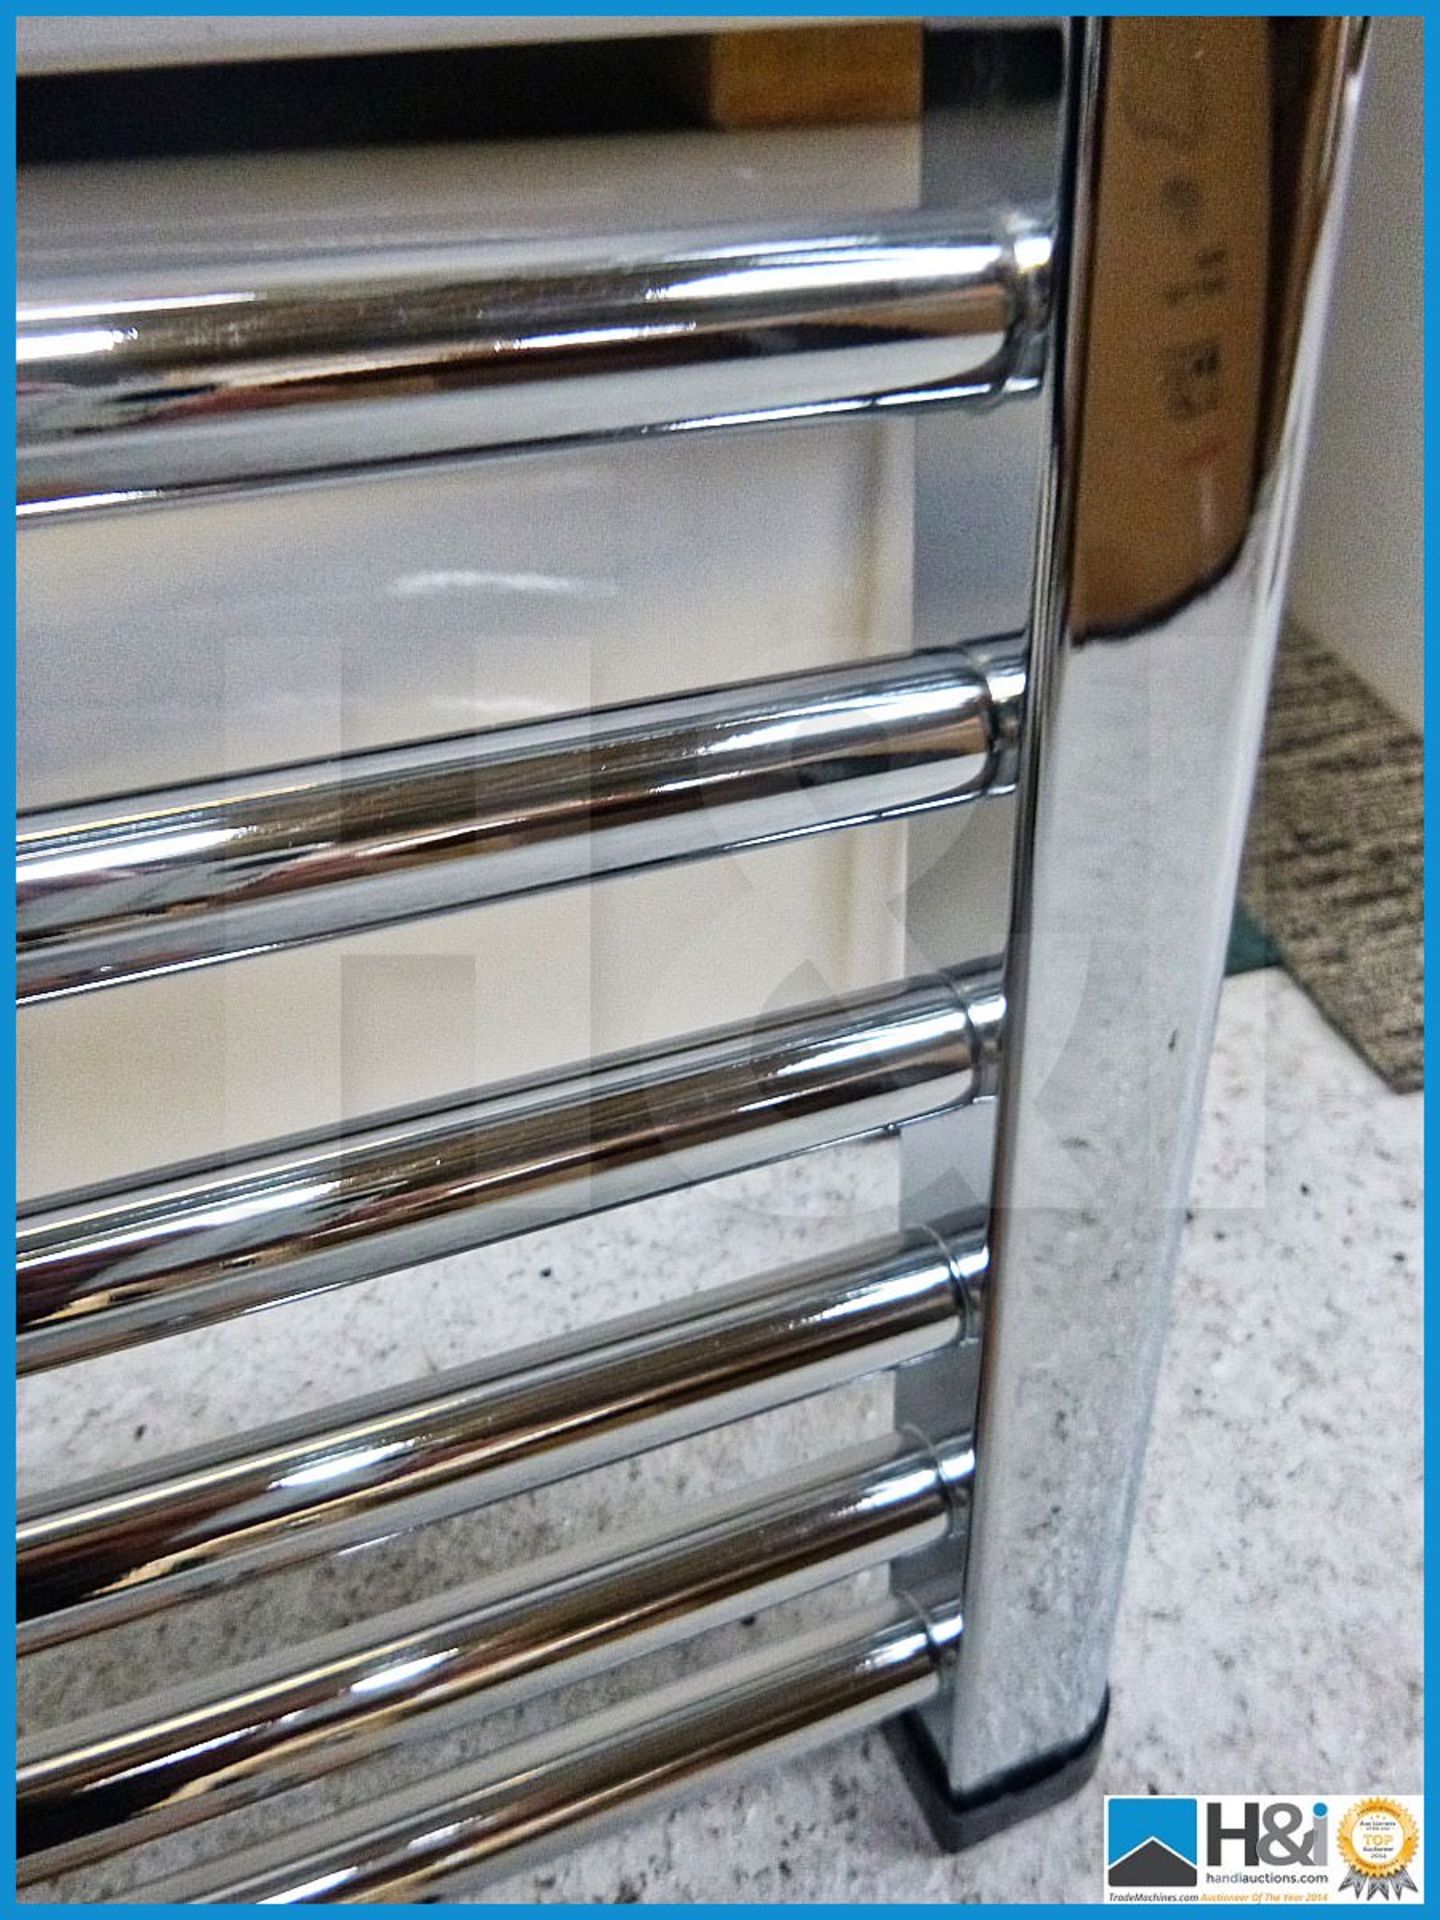 Chrome towel radiator 800mmX500mm Complete with fittings RRP 149 GBP - Image 3 of 4